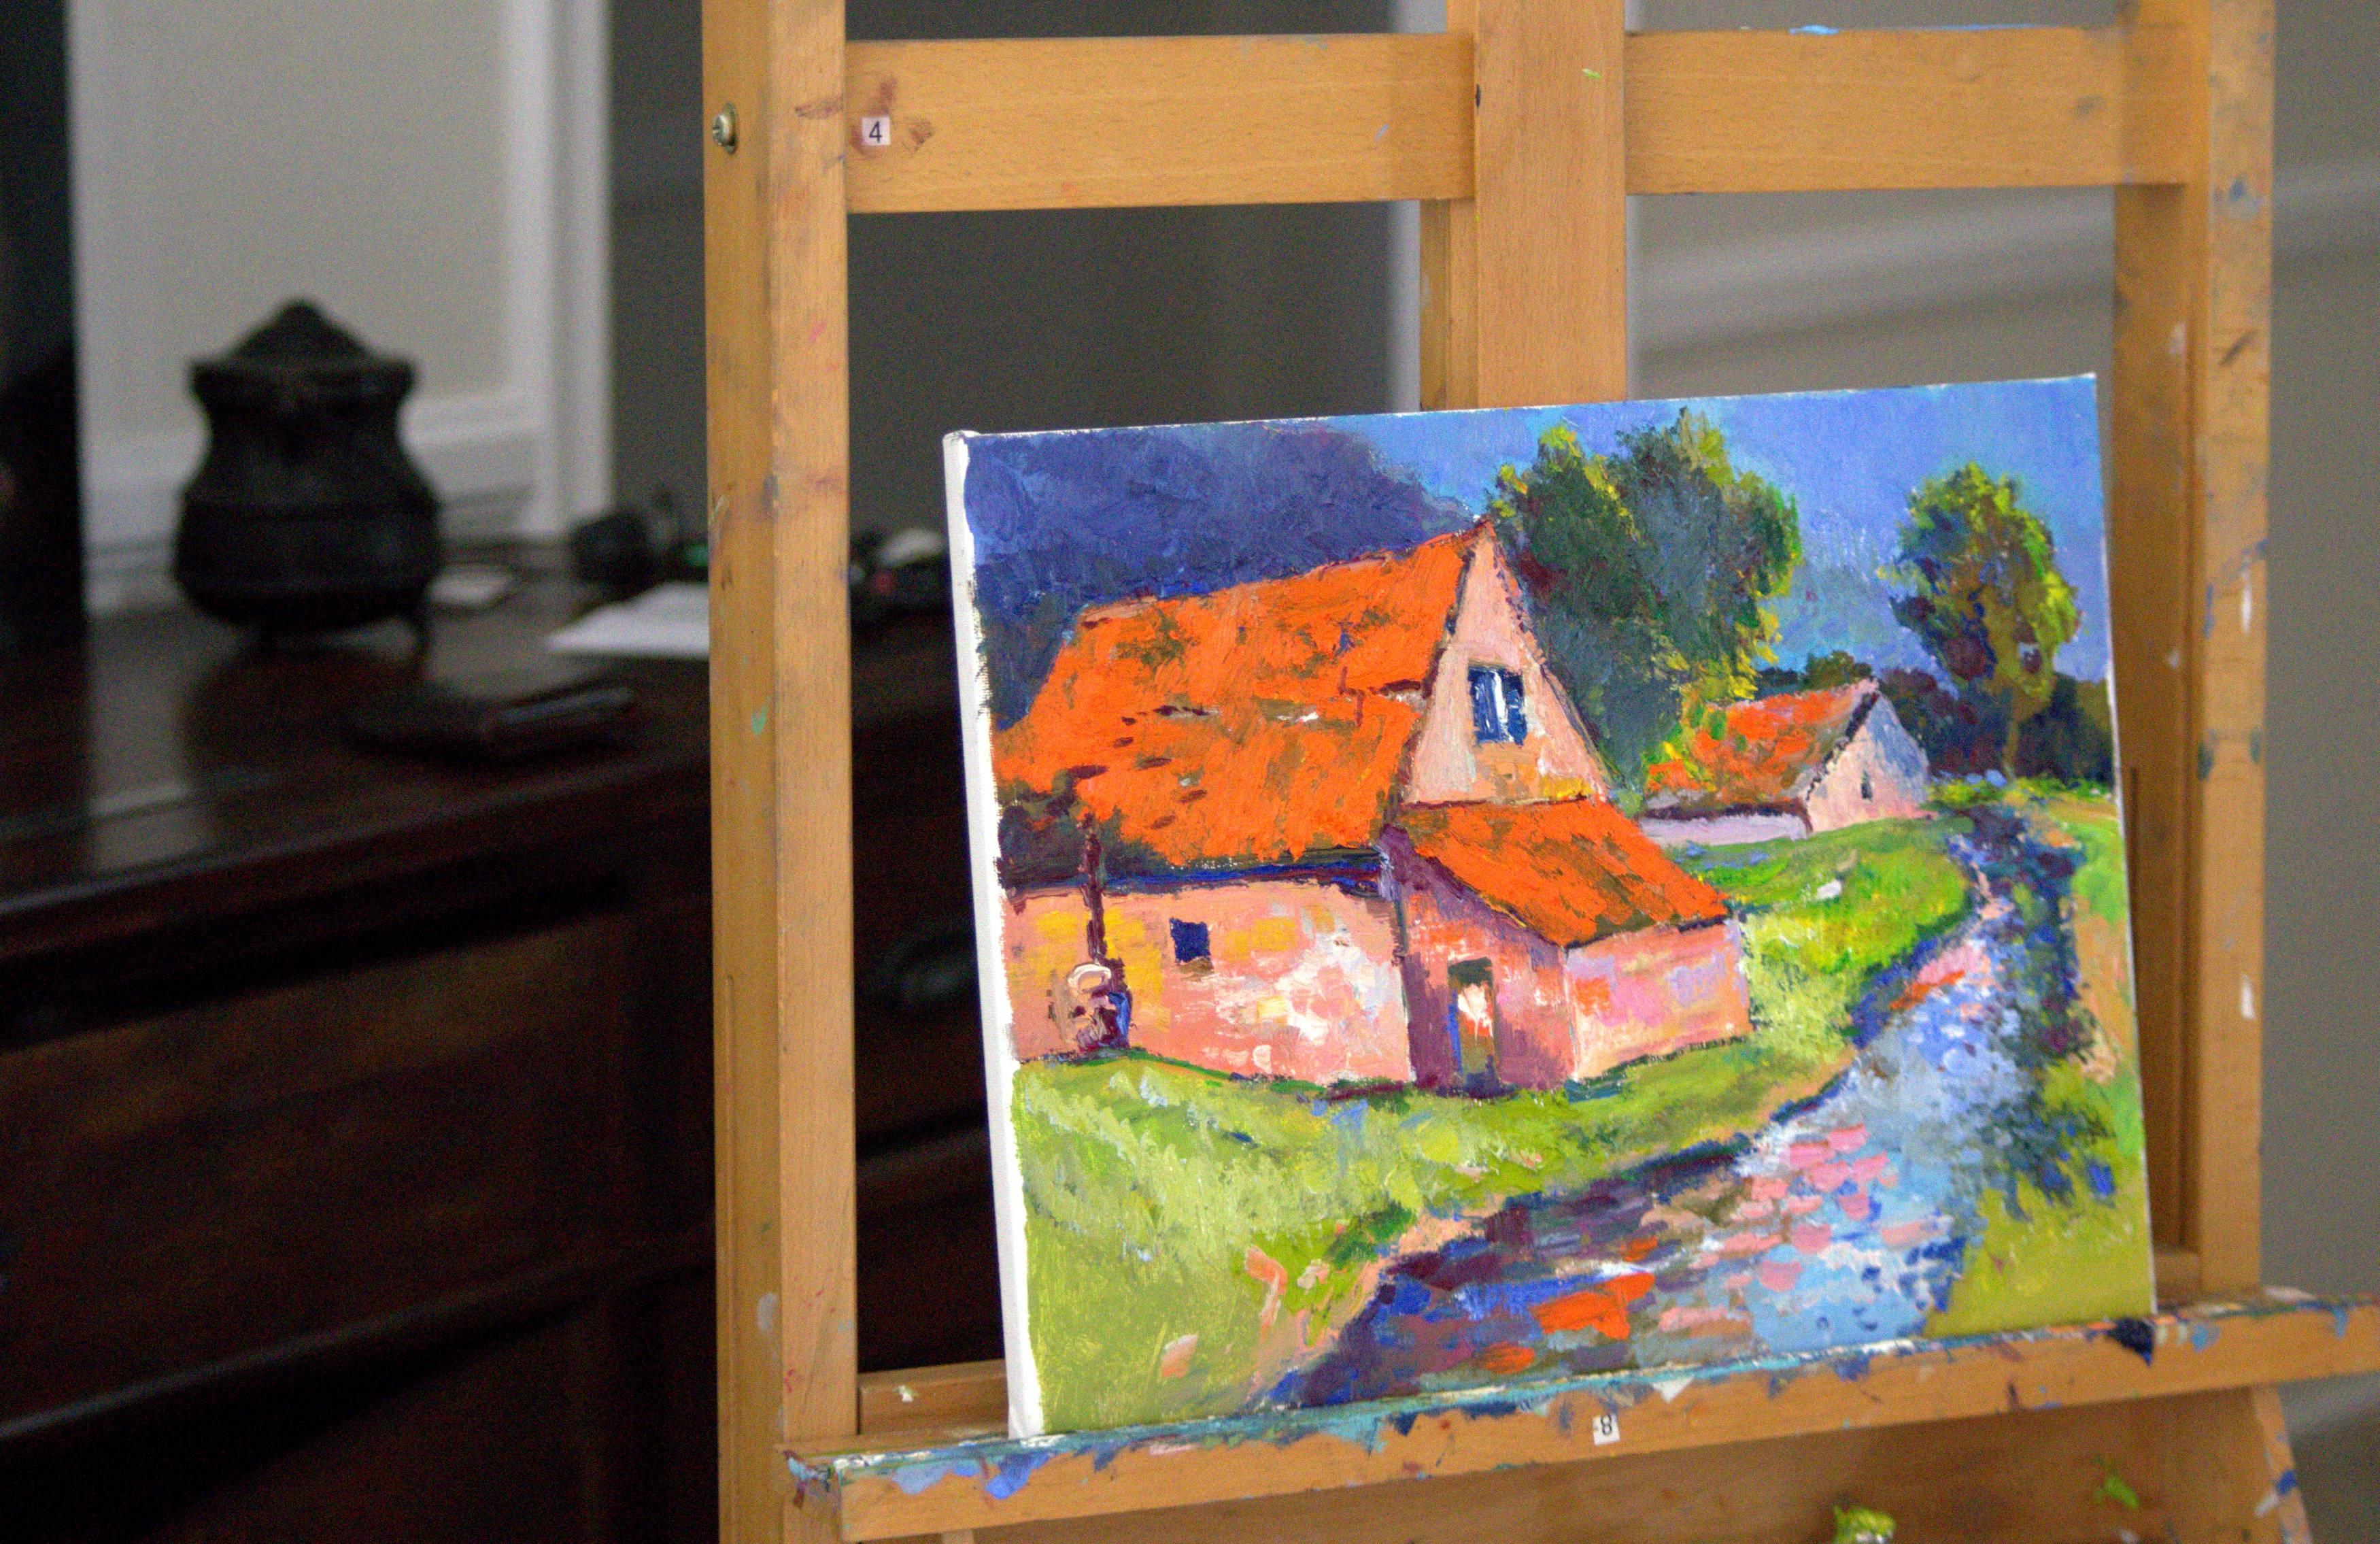 <p>Artist Comments<br>Inspired by Eastern European Landscape, I painted this work to express the contrast and dramatic beauty of old houses with green nature.</p><p>About the Artist<br>Suren is an impressionist painter eloquently capturing nature,